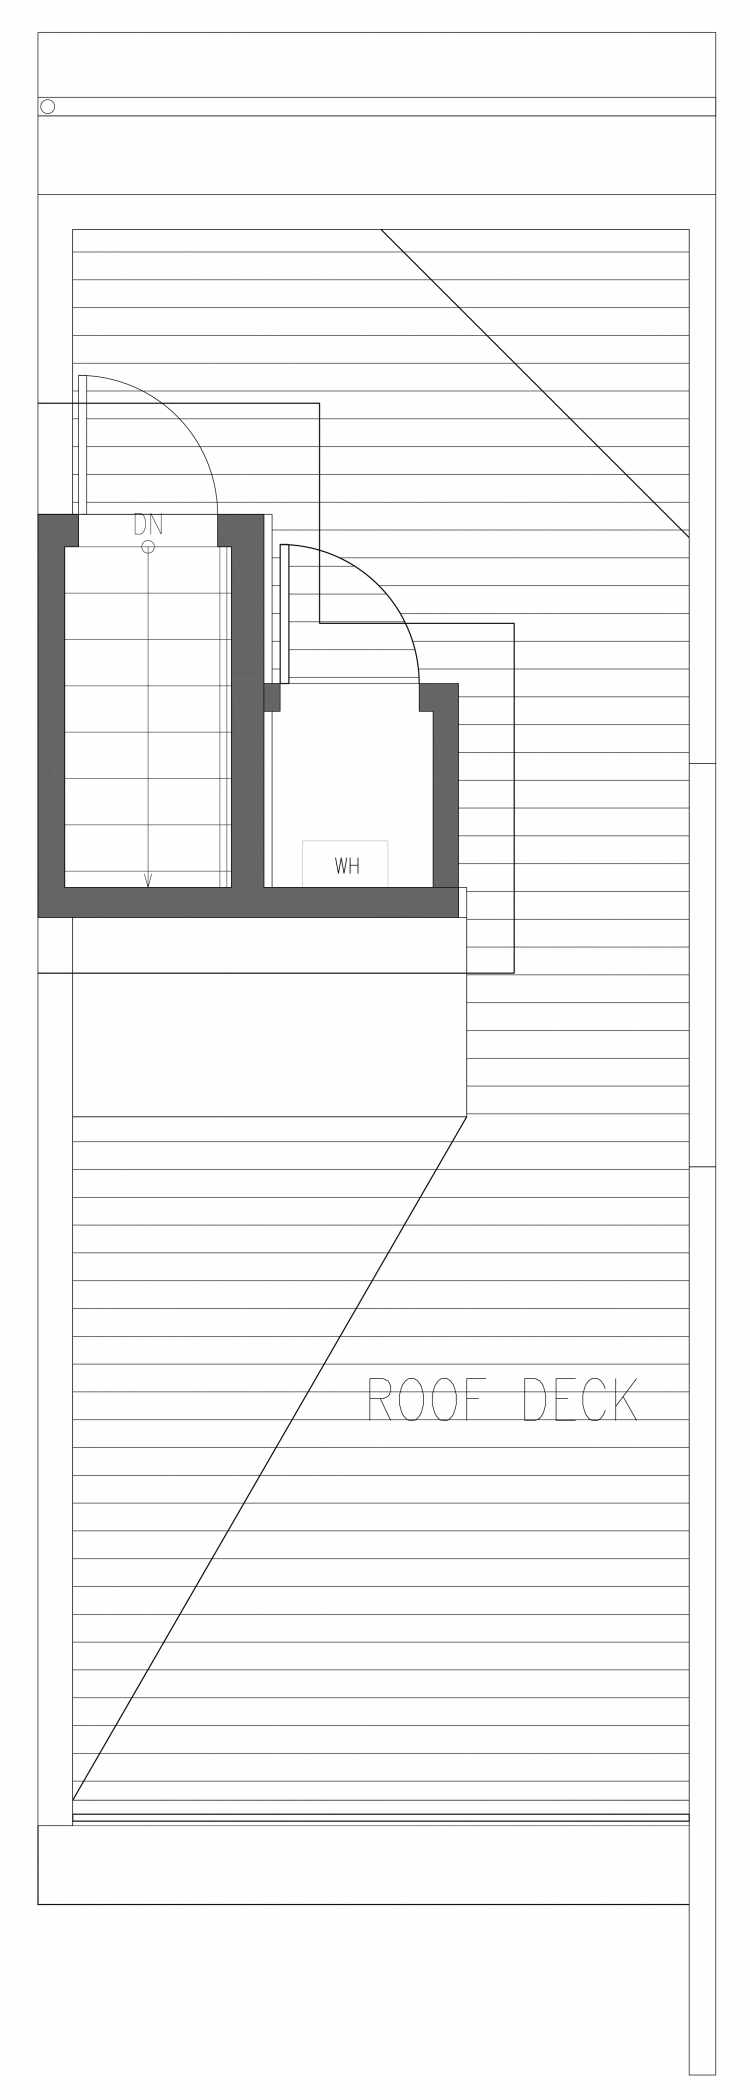 Roof Deck Floor Plan of 2361 Beacon Ave S, One of the Brea Townhomes in North Beacon Hill